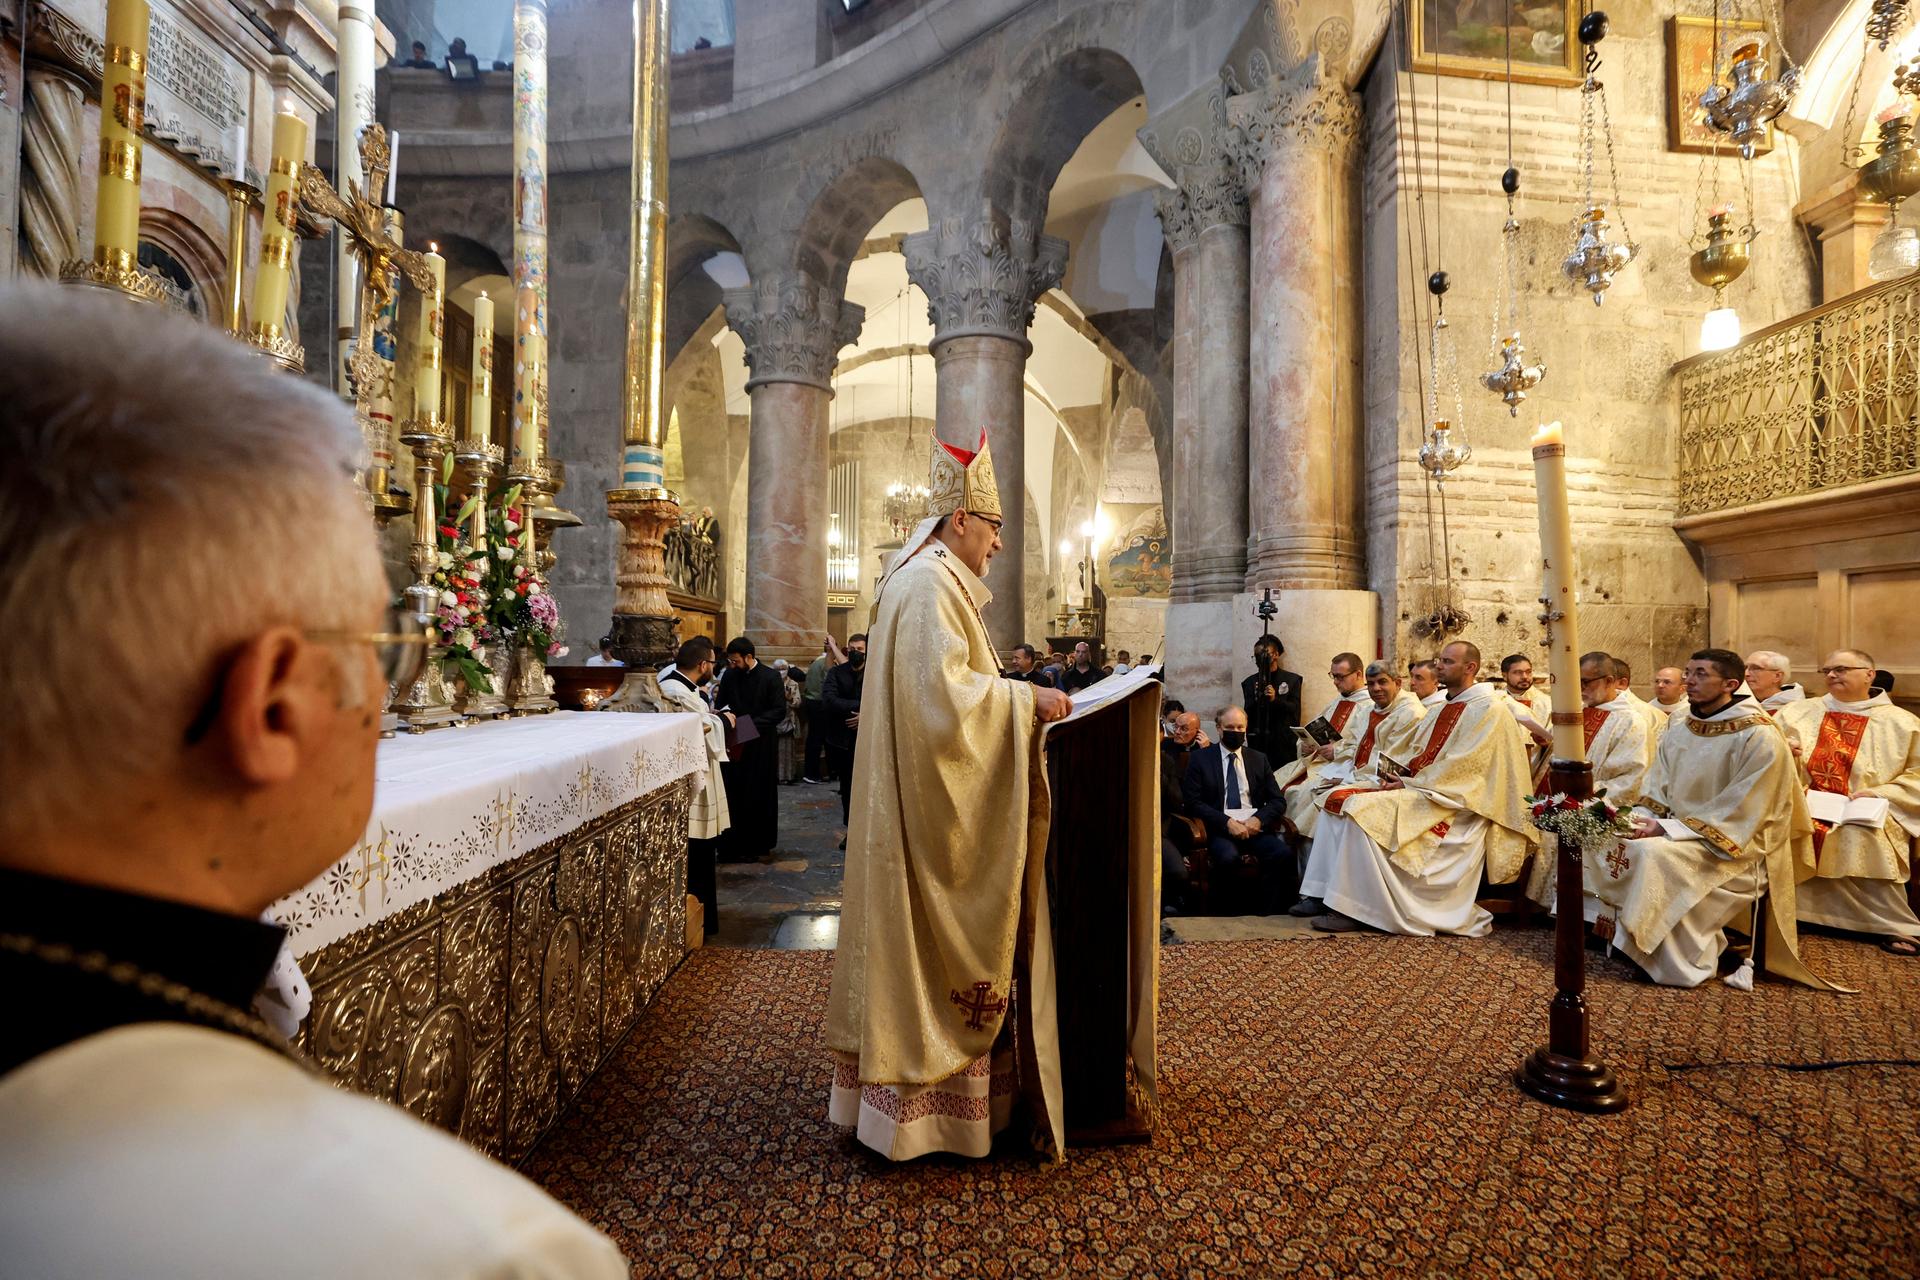 Welcome Resurrection with trust and love, says Jerusalem archbishop